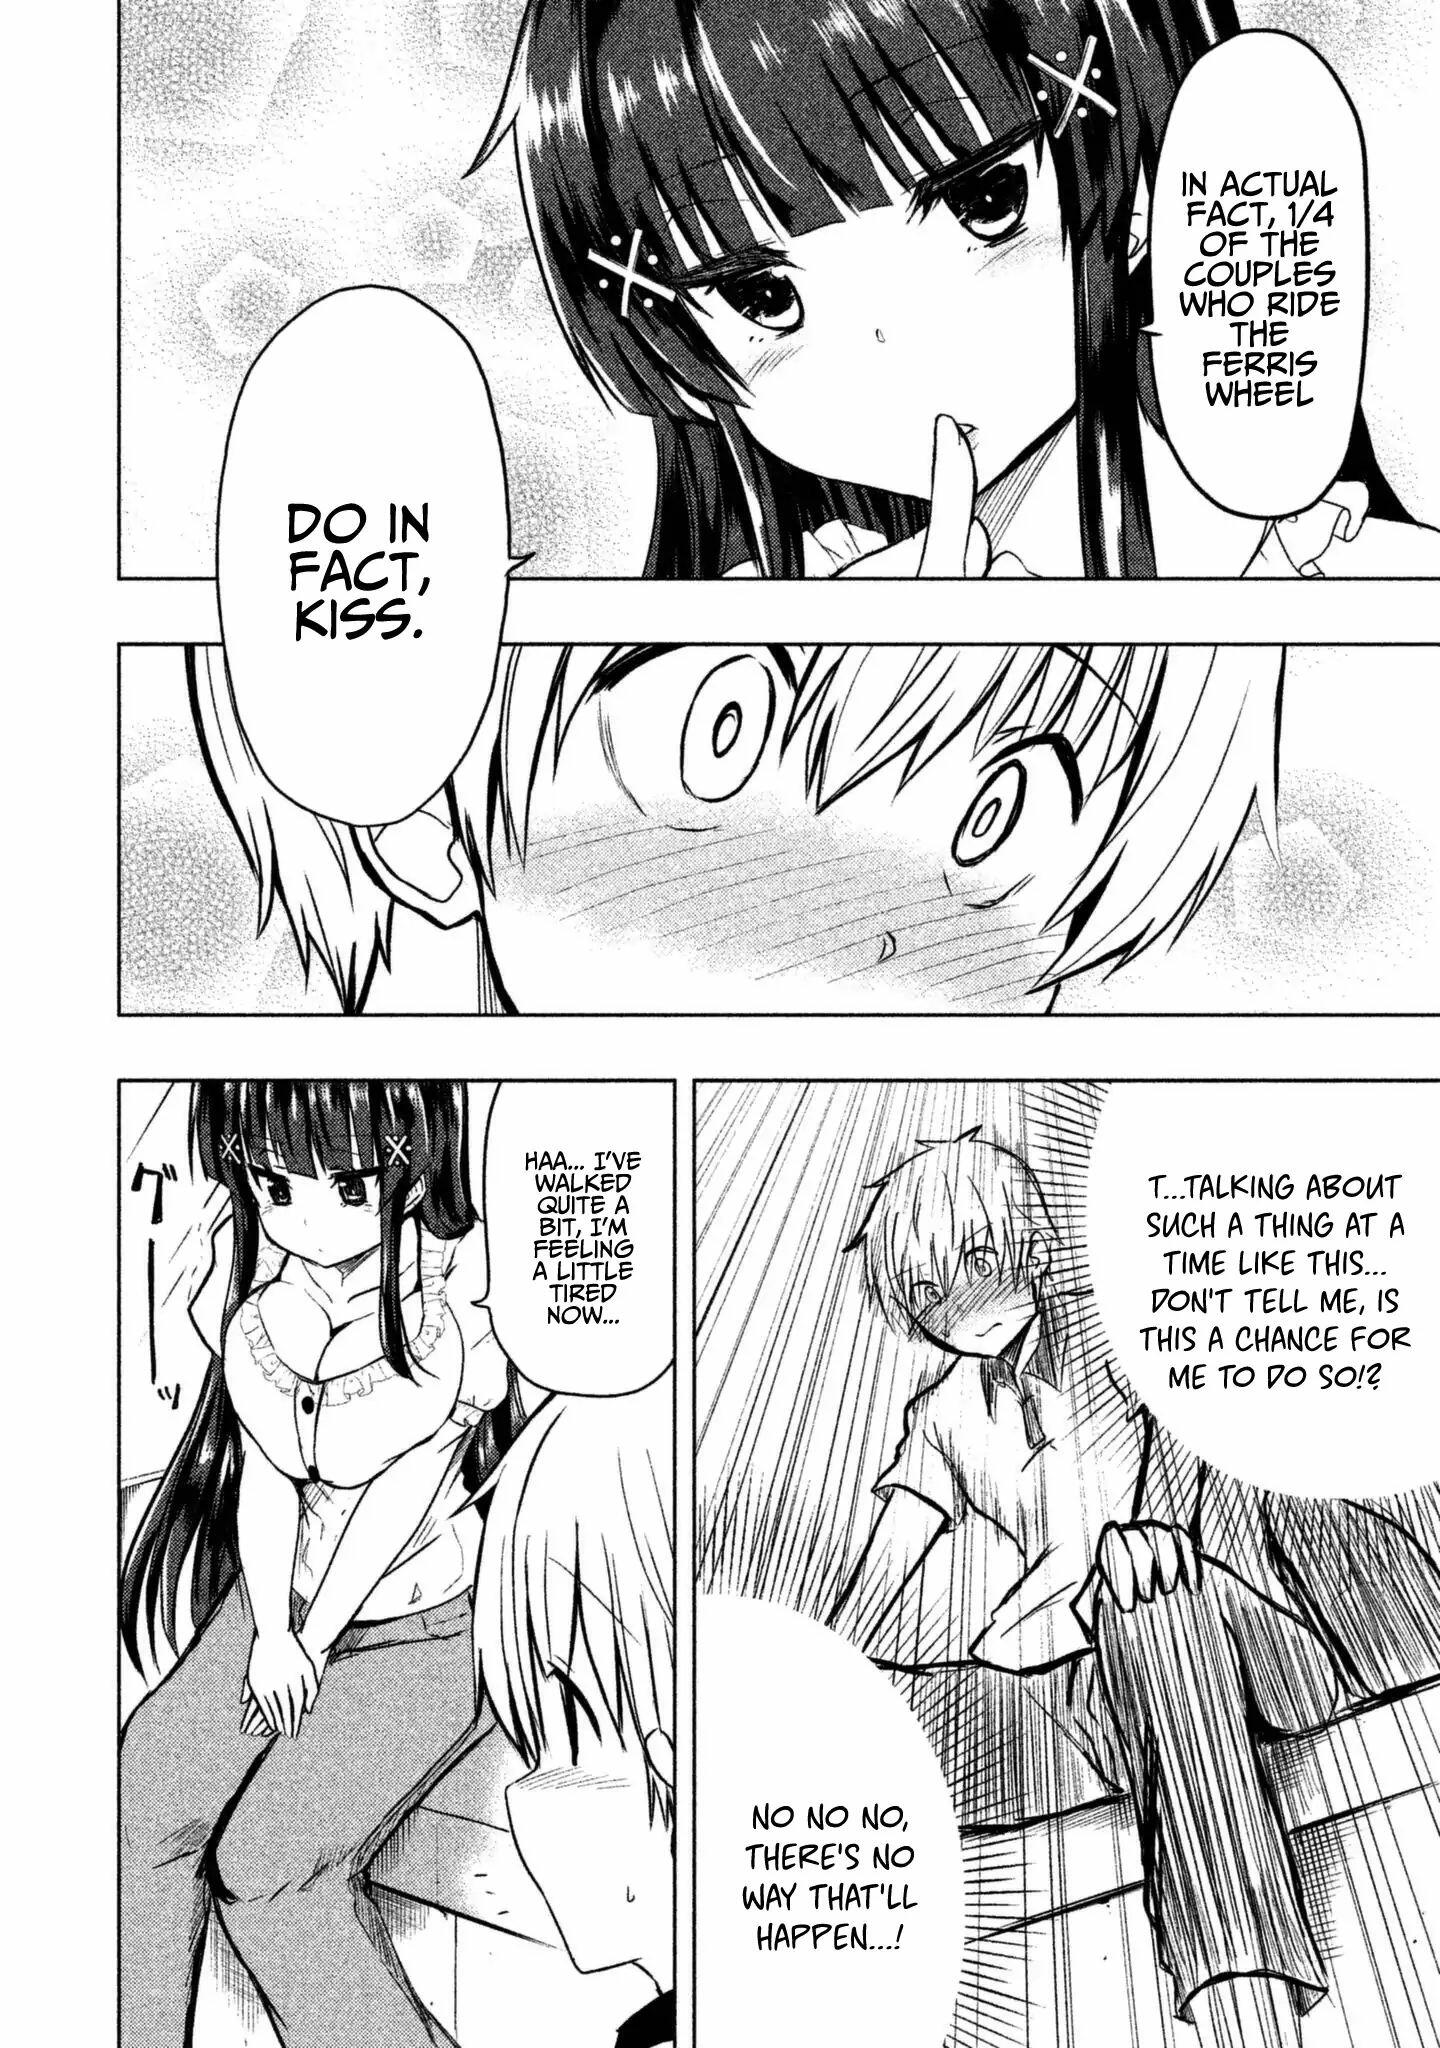 A Girl Who Is Very Well-Informed About Weird Knowledge, Takayukashiki Souko-San Vol.1 Chapter 8: Distance page 5 - Mangakakalots.com